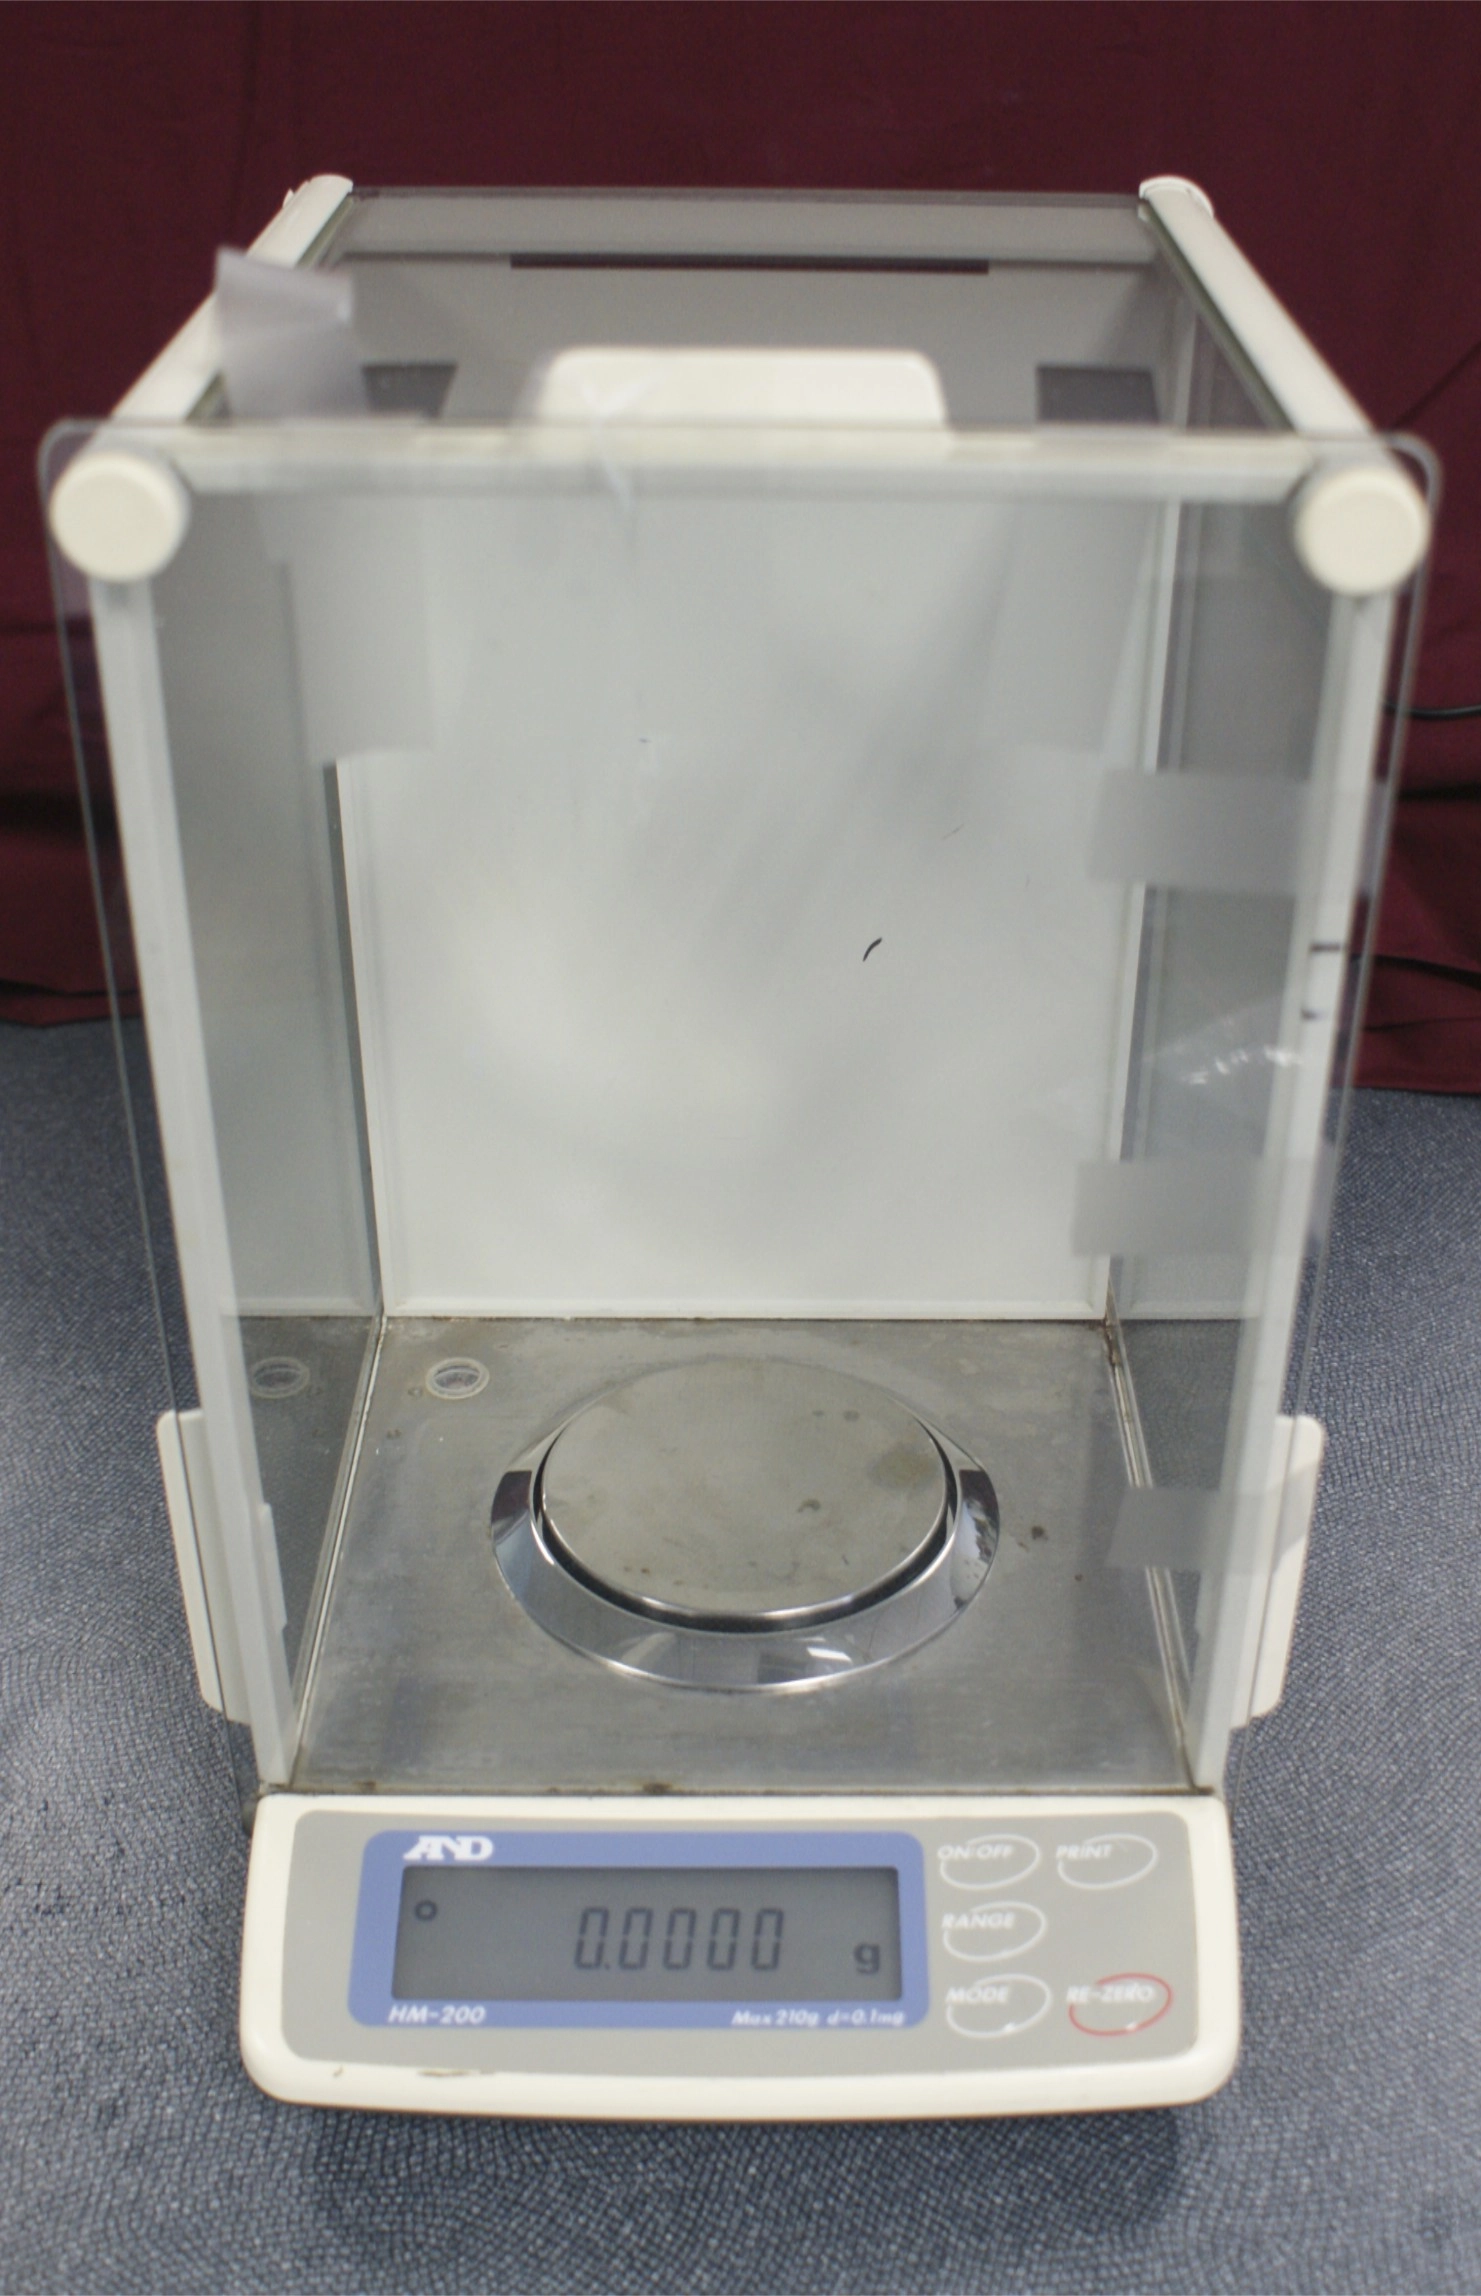 A&amp;D Weighing HM-200 AND HM-200 A&amp;D HM-200 Analytical Balance used working nicely